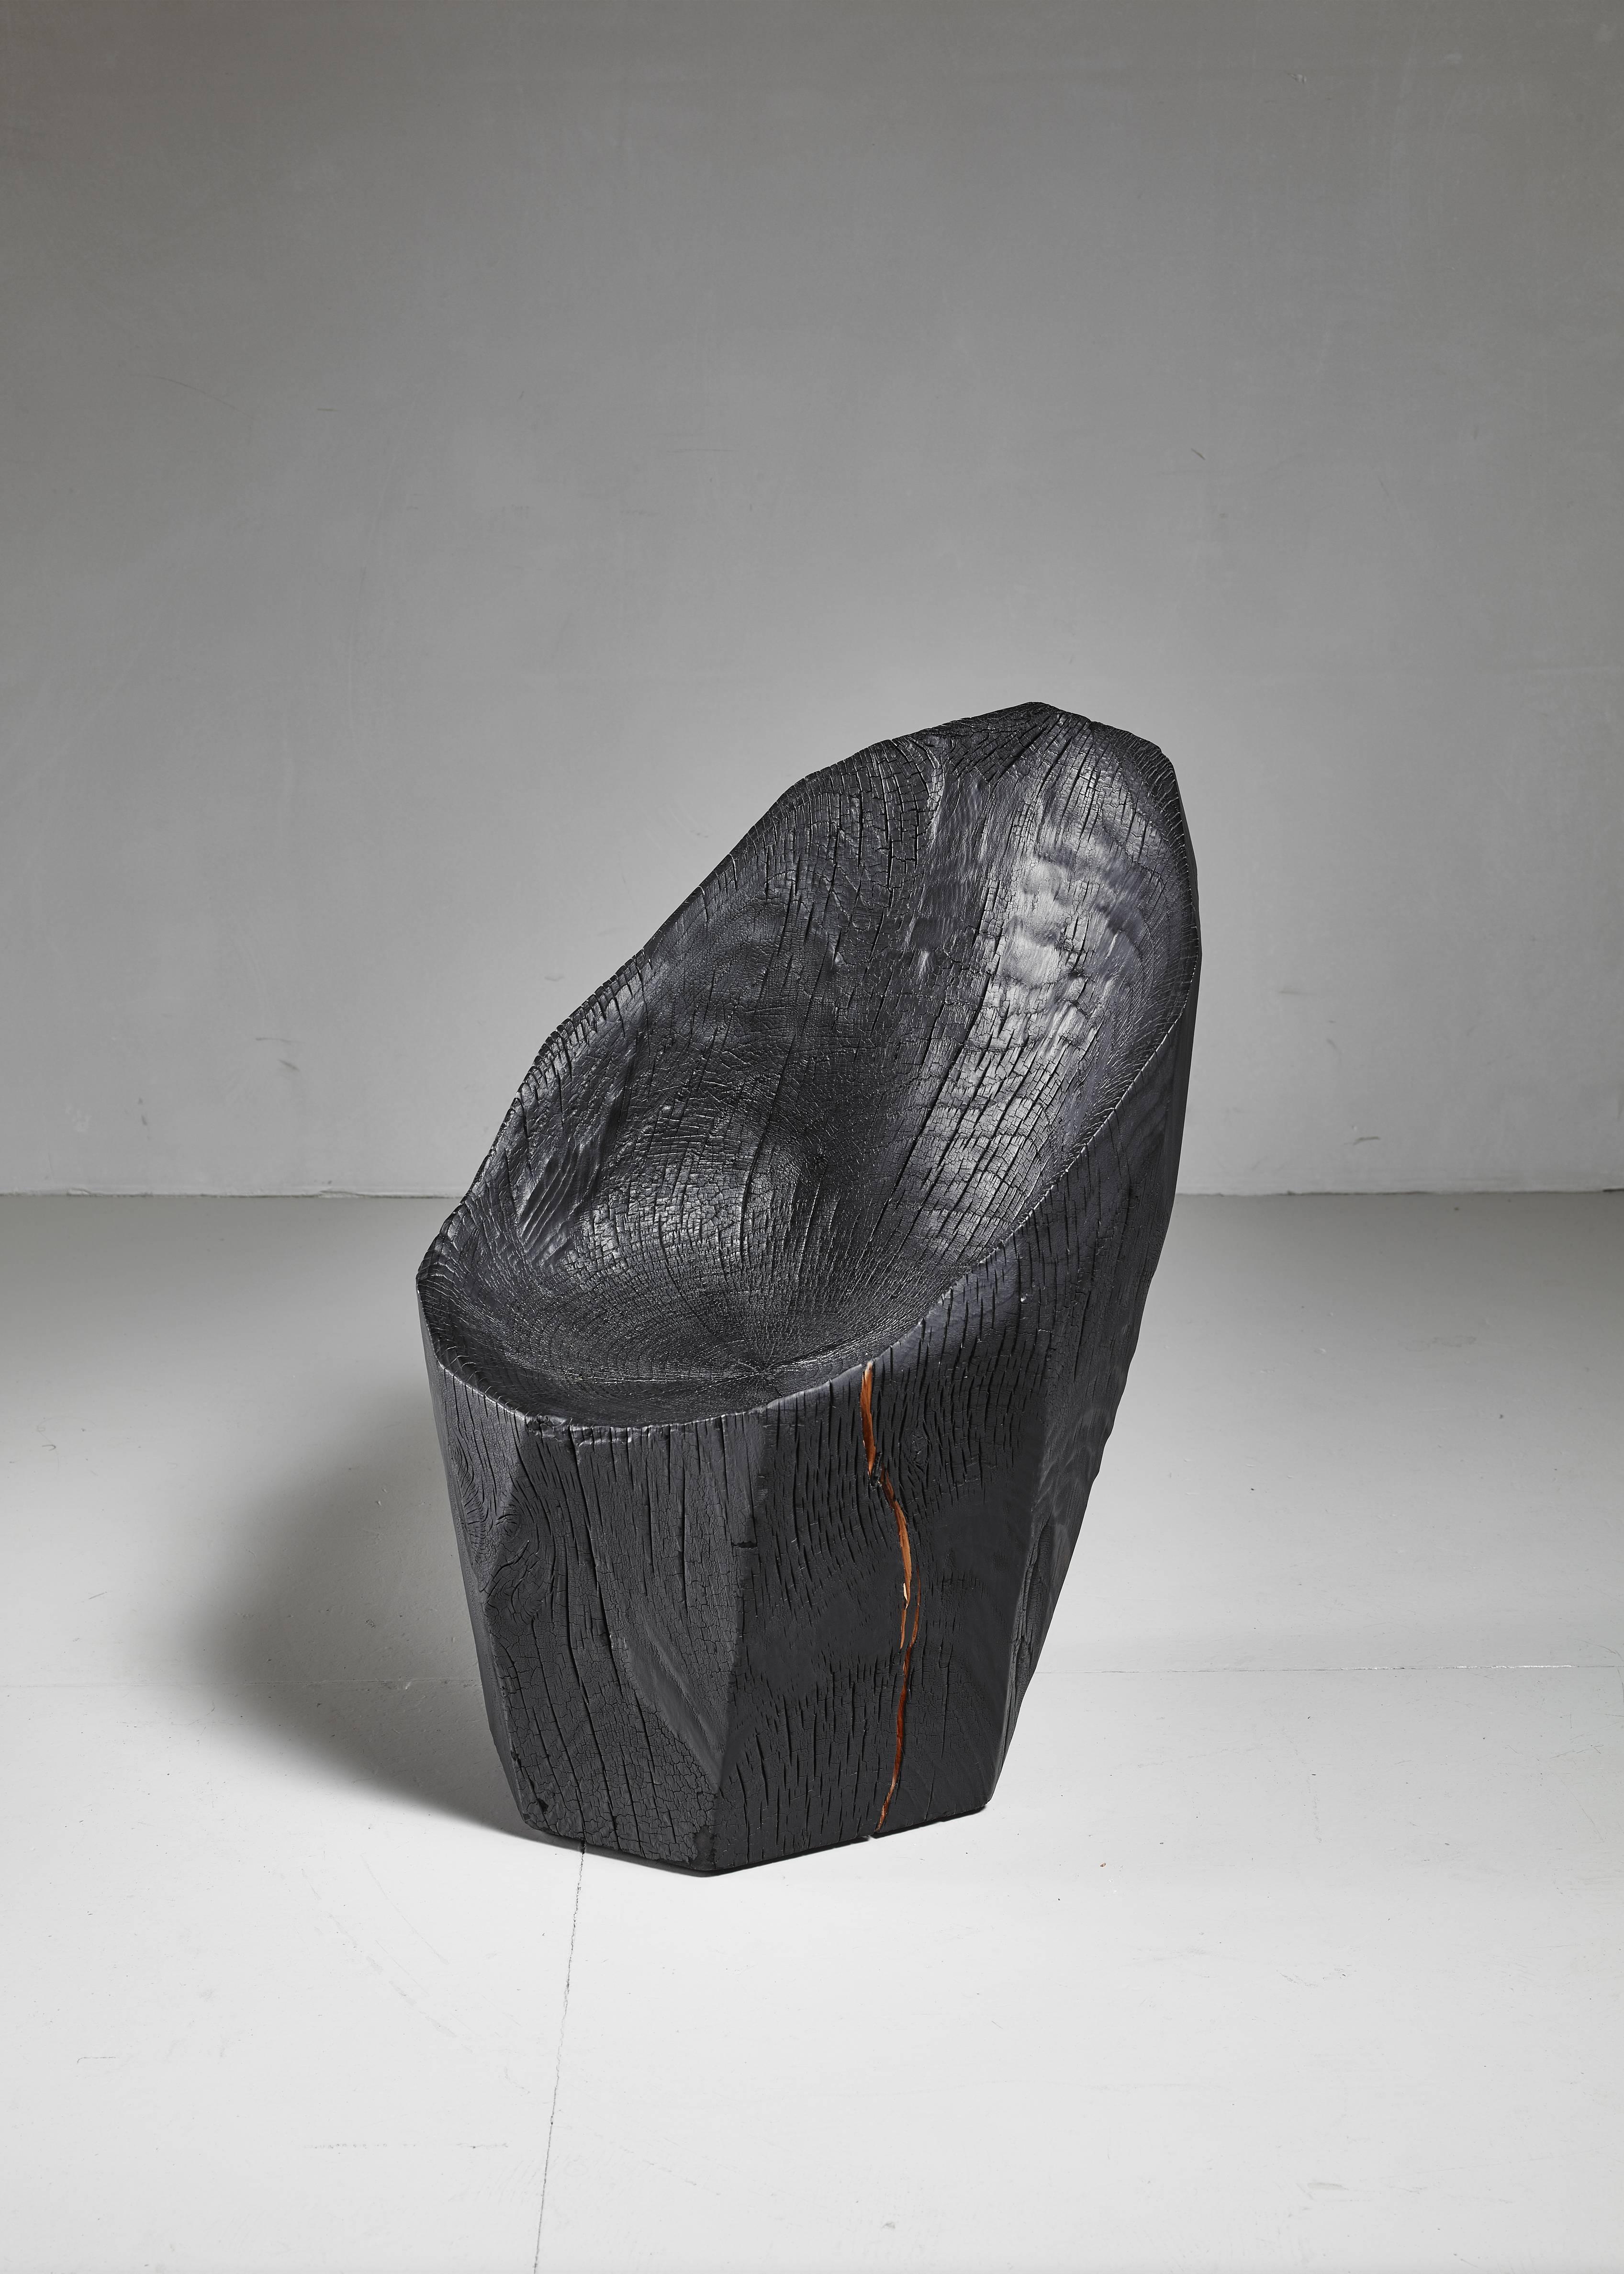 An 'Ausgebrannt' chair made from a solid piece of oak from a naturally fallen tree by Belgian artist Kaspar Hamacher.

Hamacher (1981), son of a forester, uses nature as the main inspiration for his work, with wood being his preferred material.